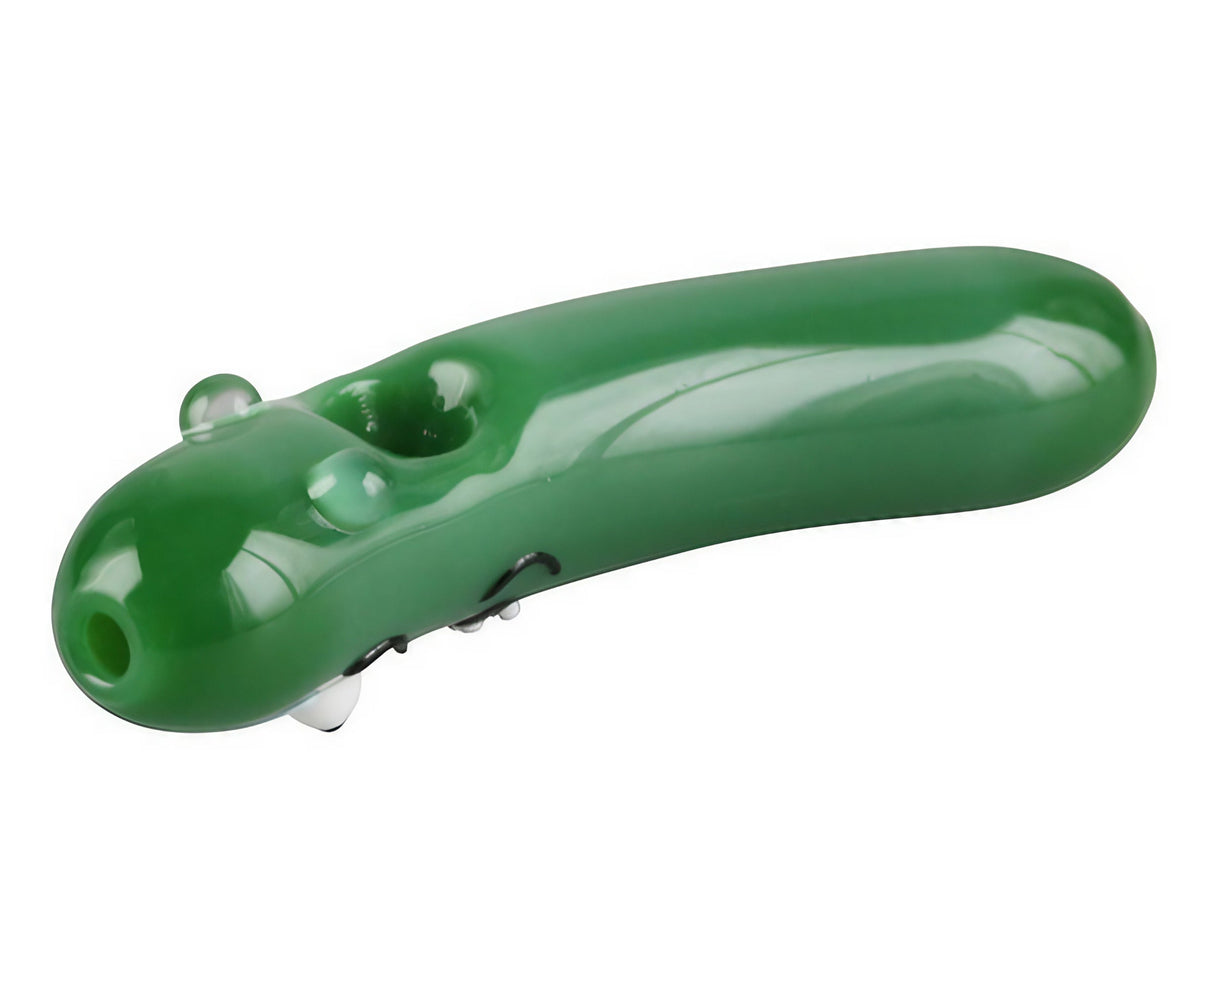 Green Rick Hand Pipe, Richard The Pickle design, 4.5" Borosilicate Glass, for Dry Herbs